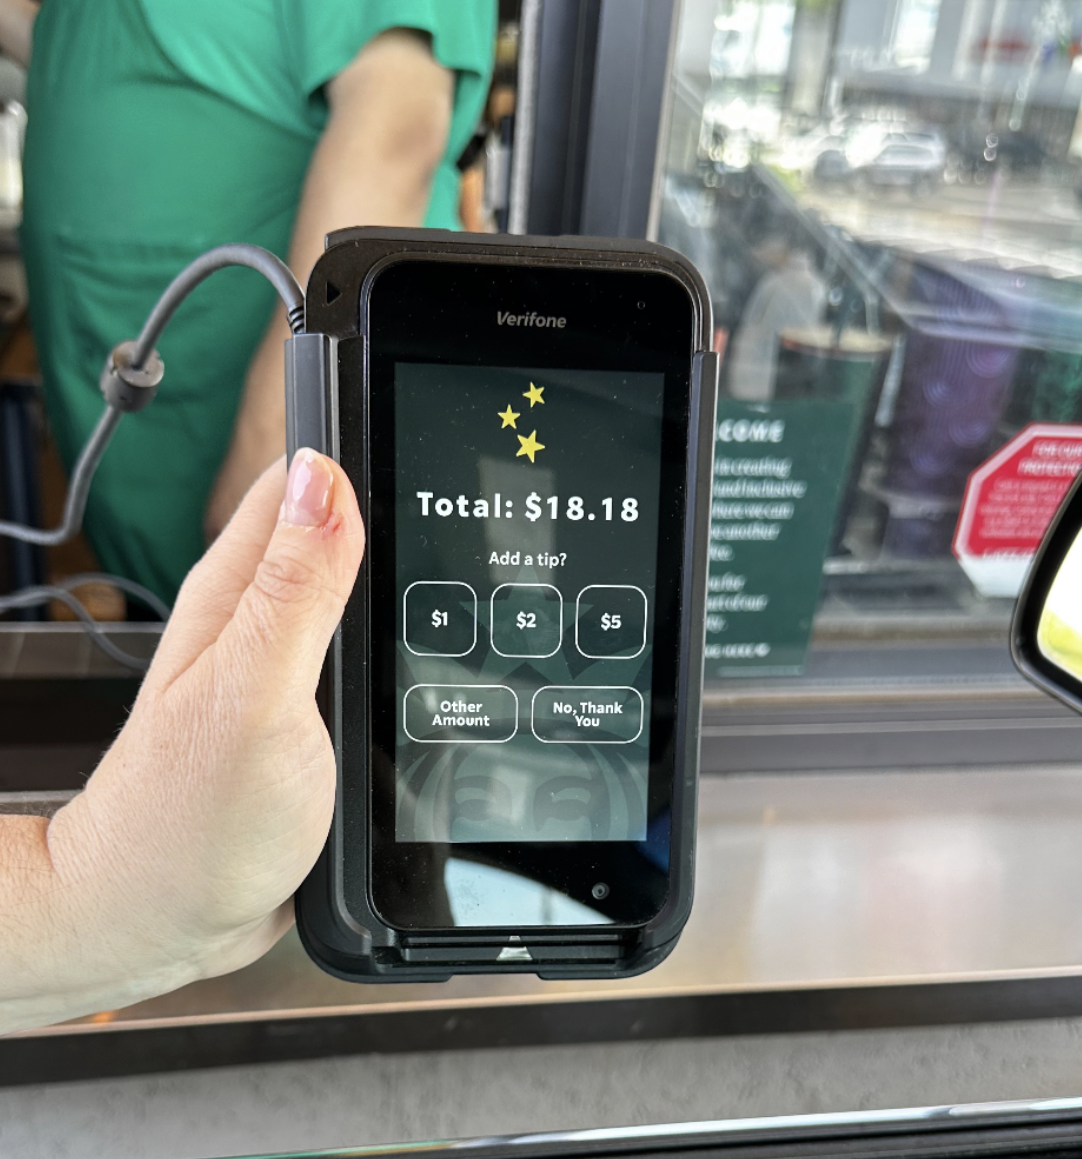 Starbucks+and+other+businesses+have+screens+that+suggest+tipping+after+each+transaction.+Many+people+report+that+they+feel+pressured+to+leave+one.+